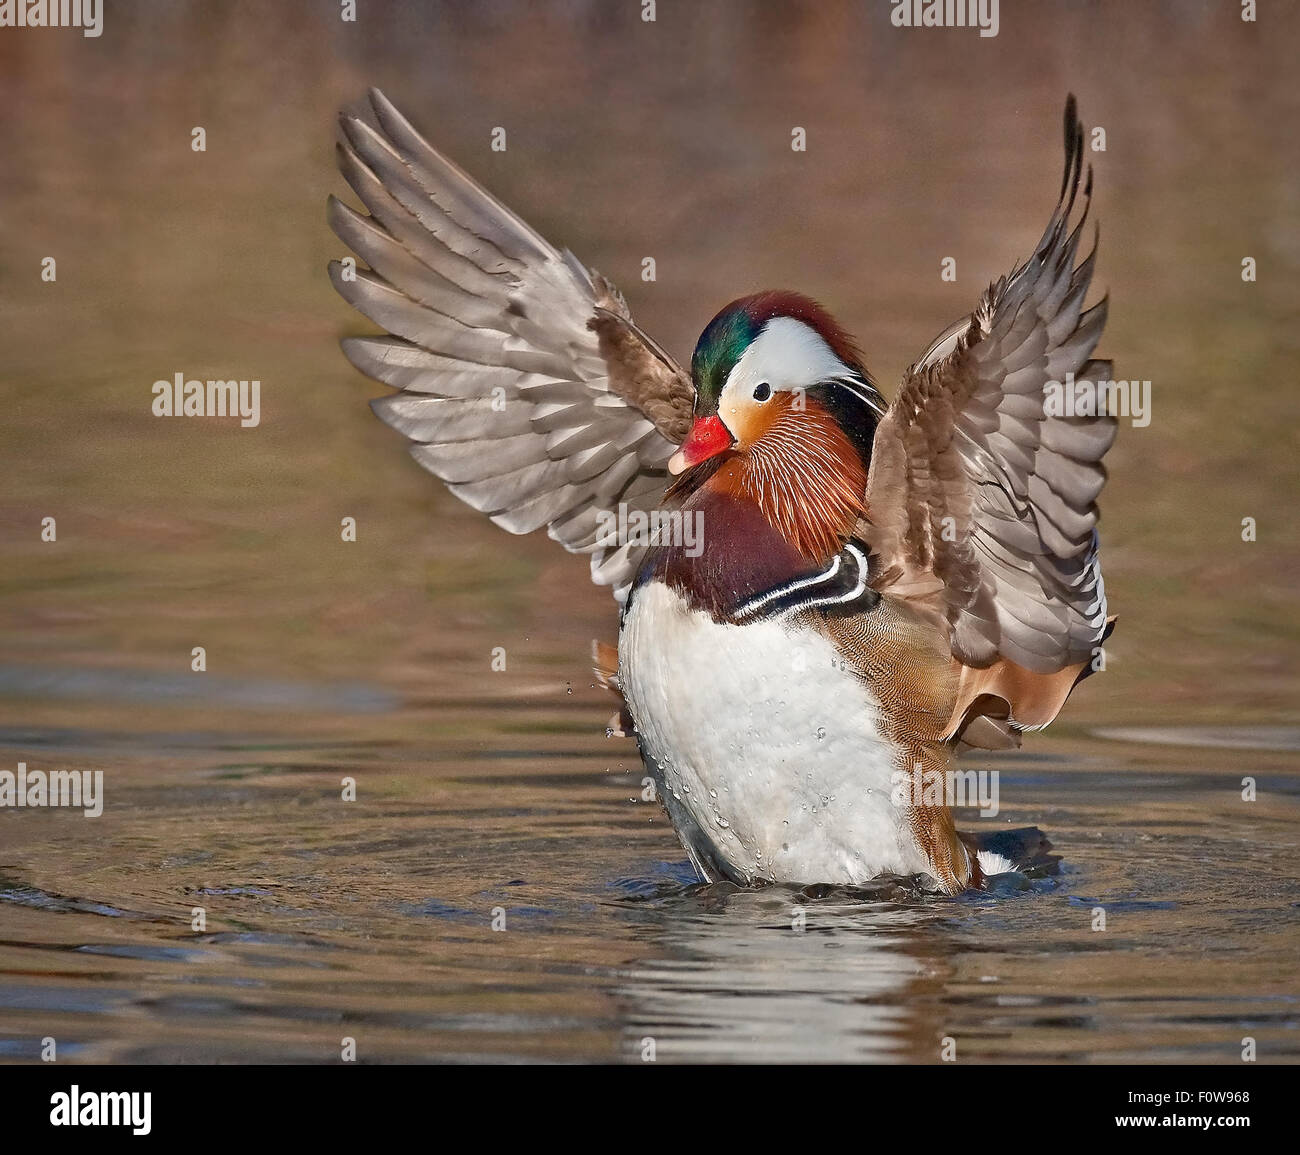 A colorful Mandarin Duck flaps his wings after taking a bath. Stock Photo